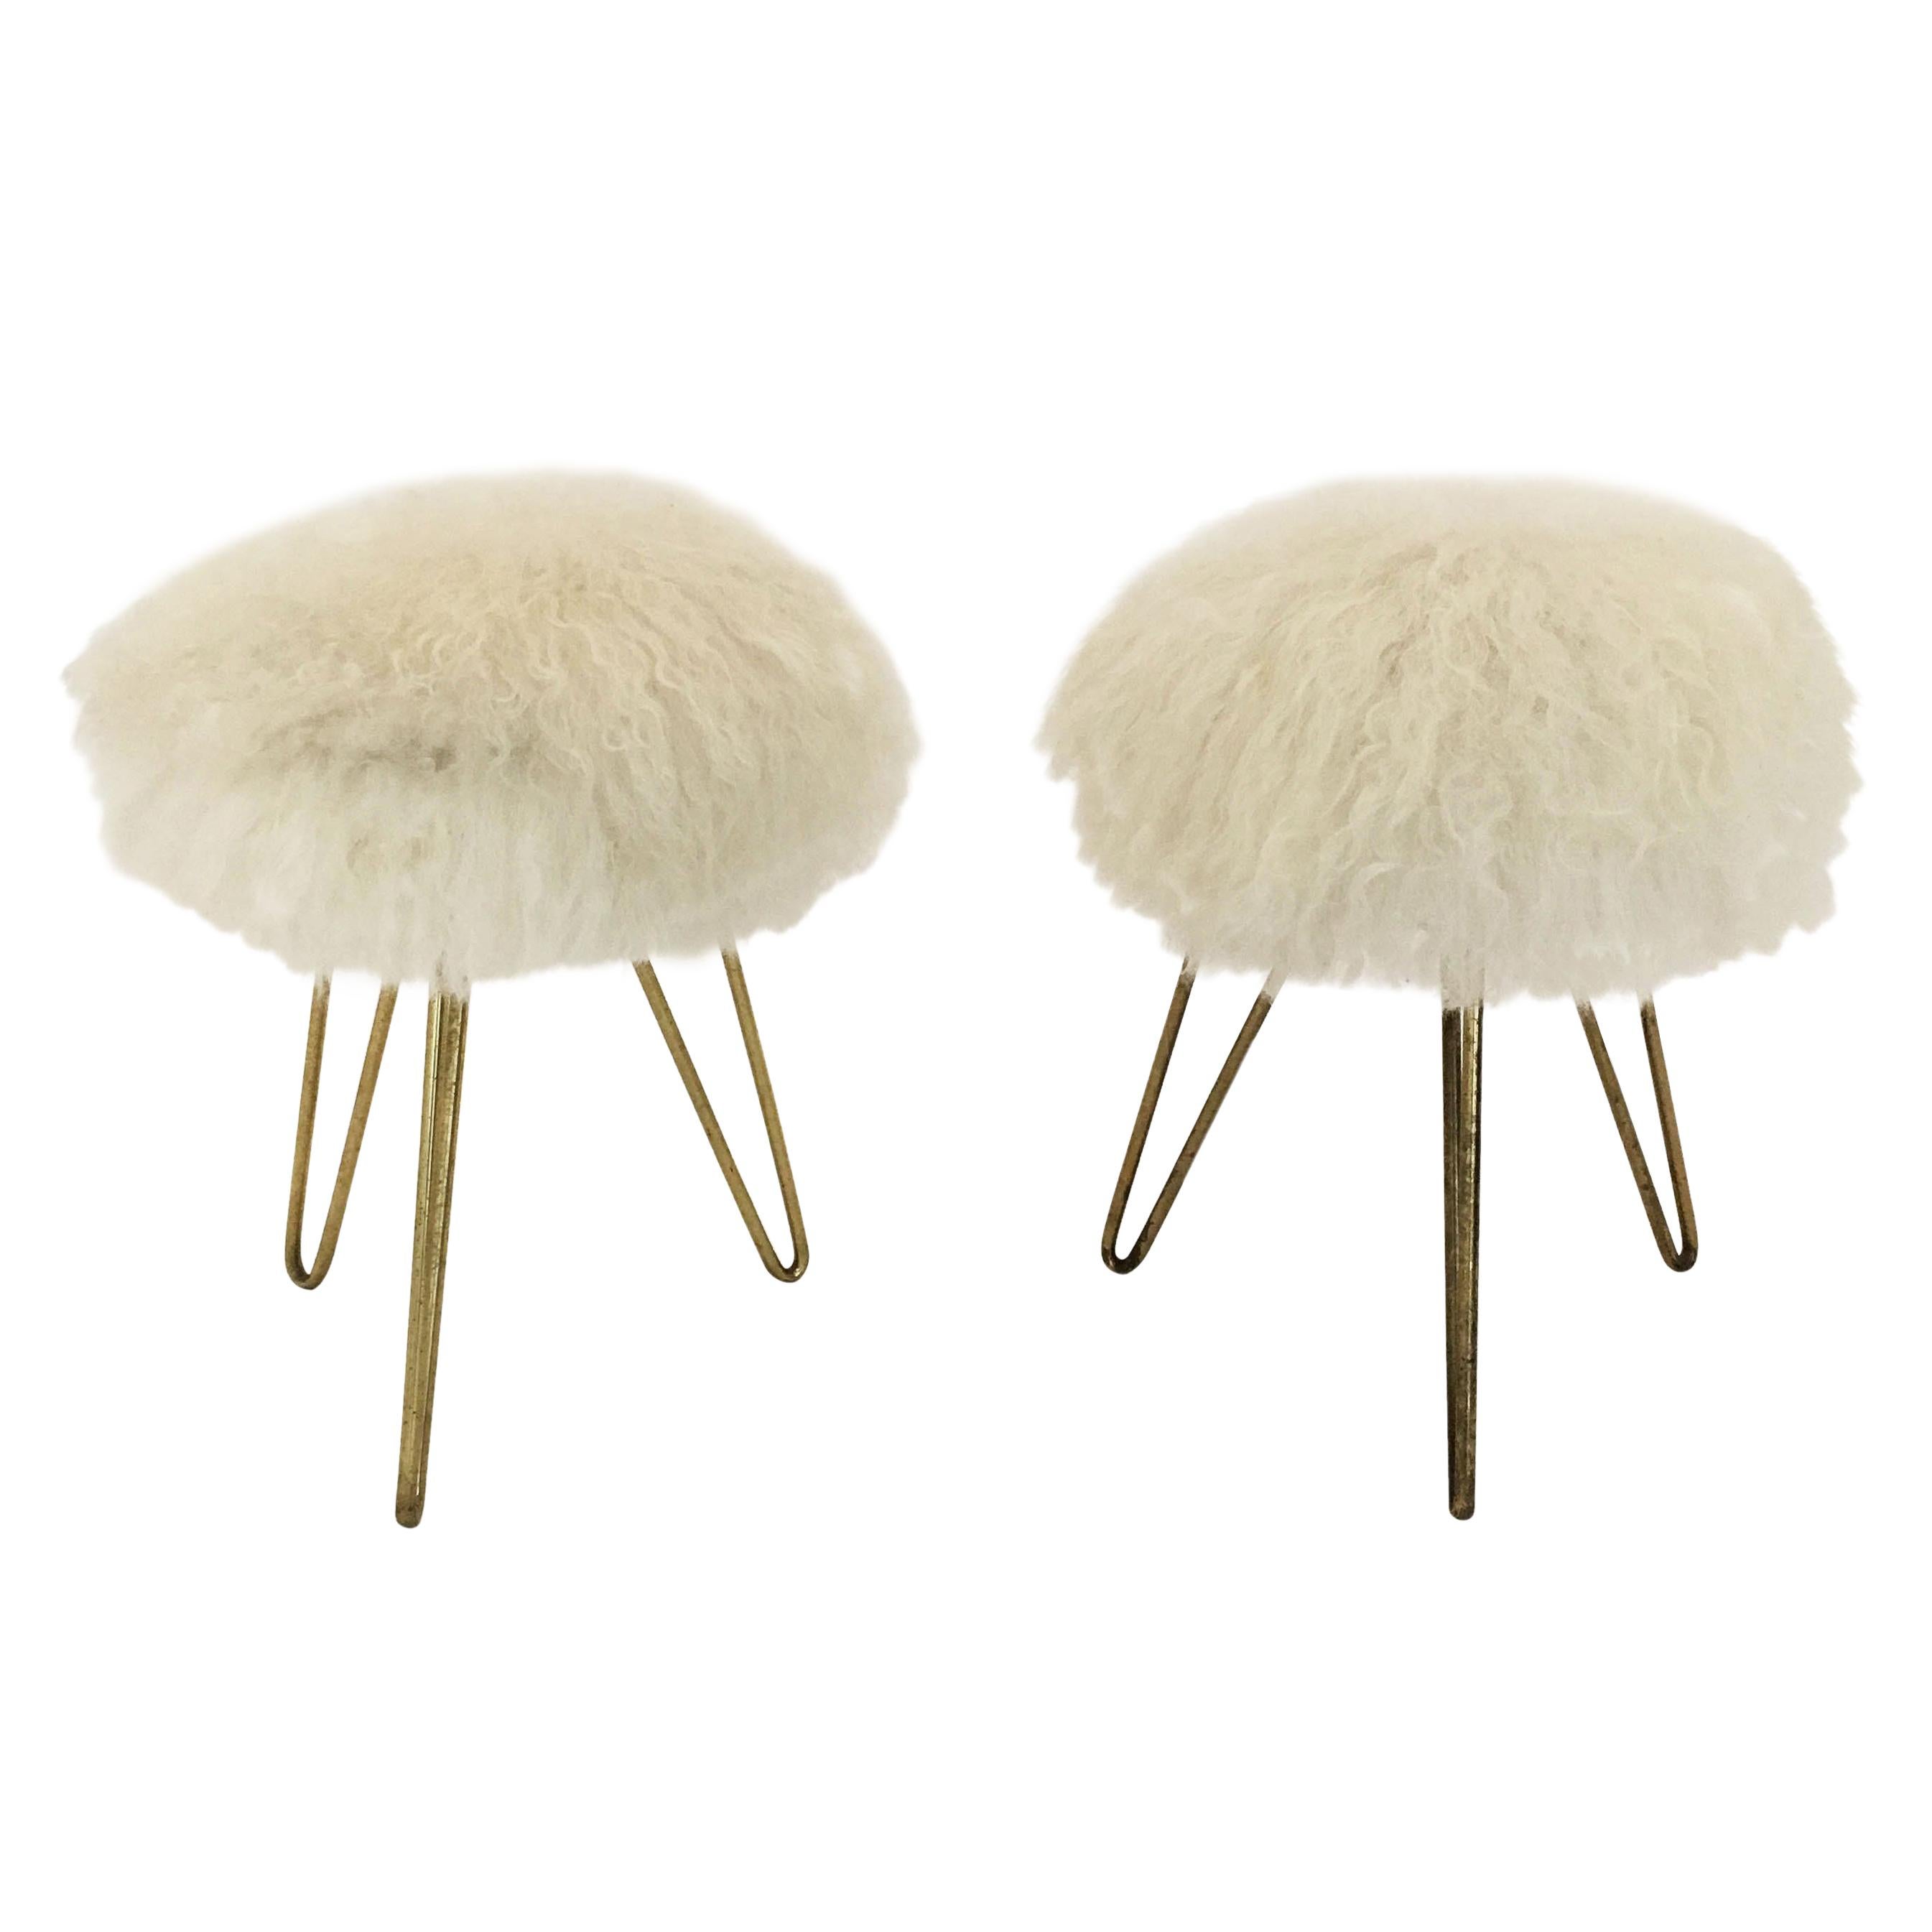 Pair of Sheep Fur Stools, France, 1950s For Sale